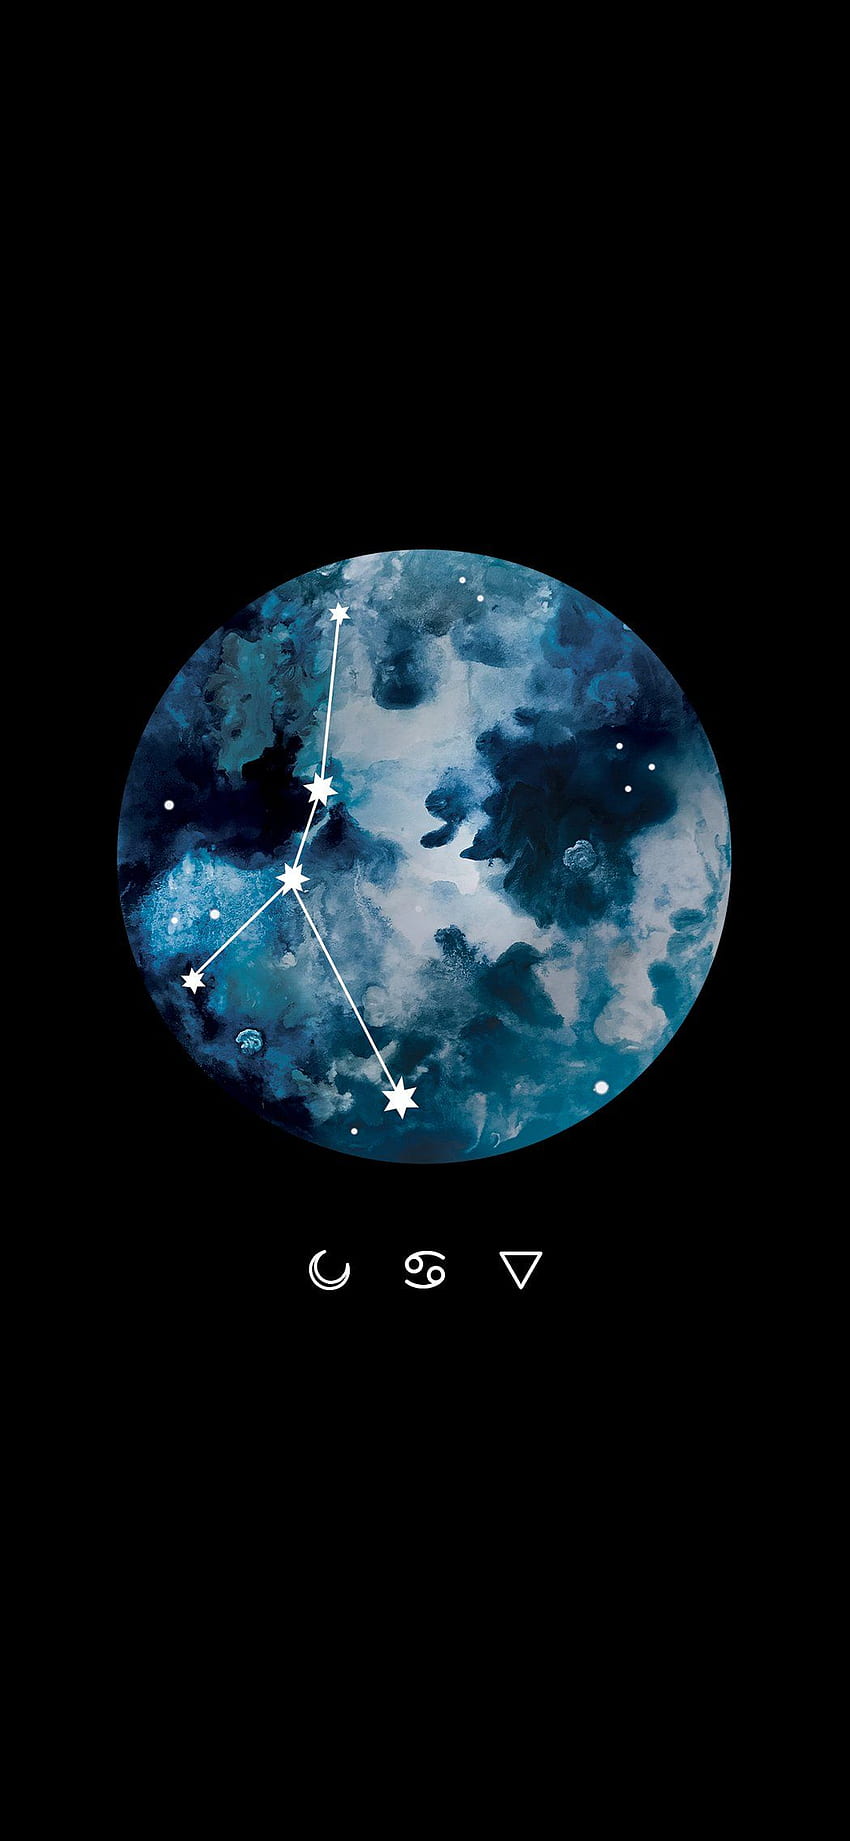 A black background with a blue and white watercolor moon with a Leo constellation. - Cancer